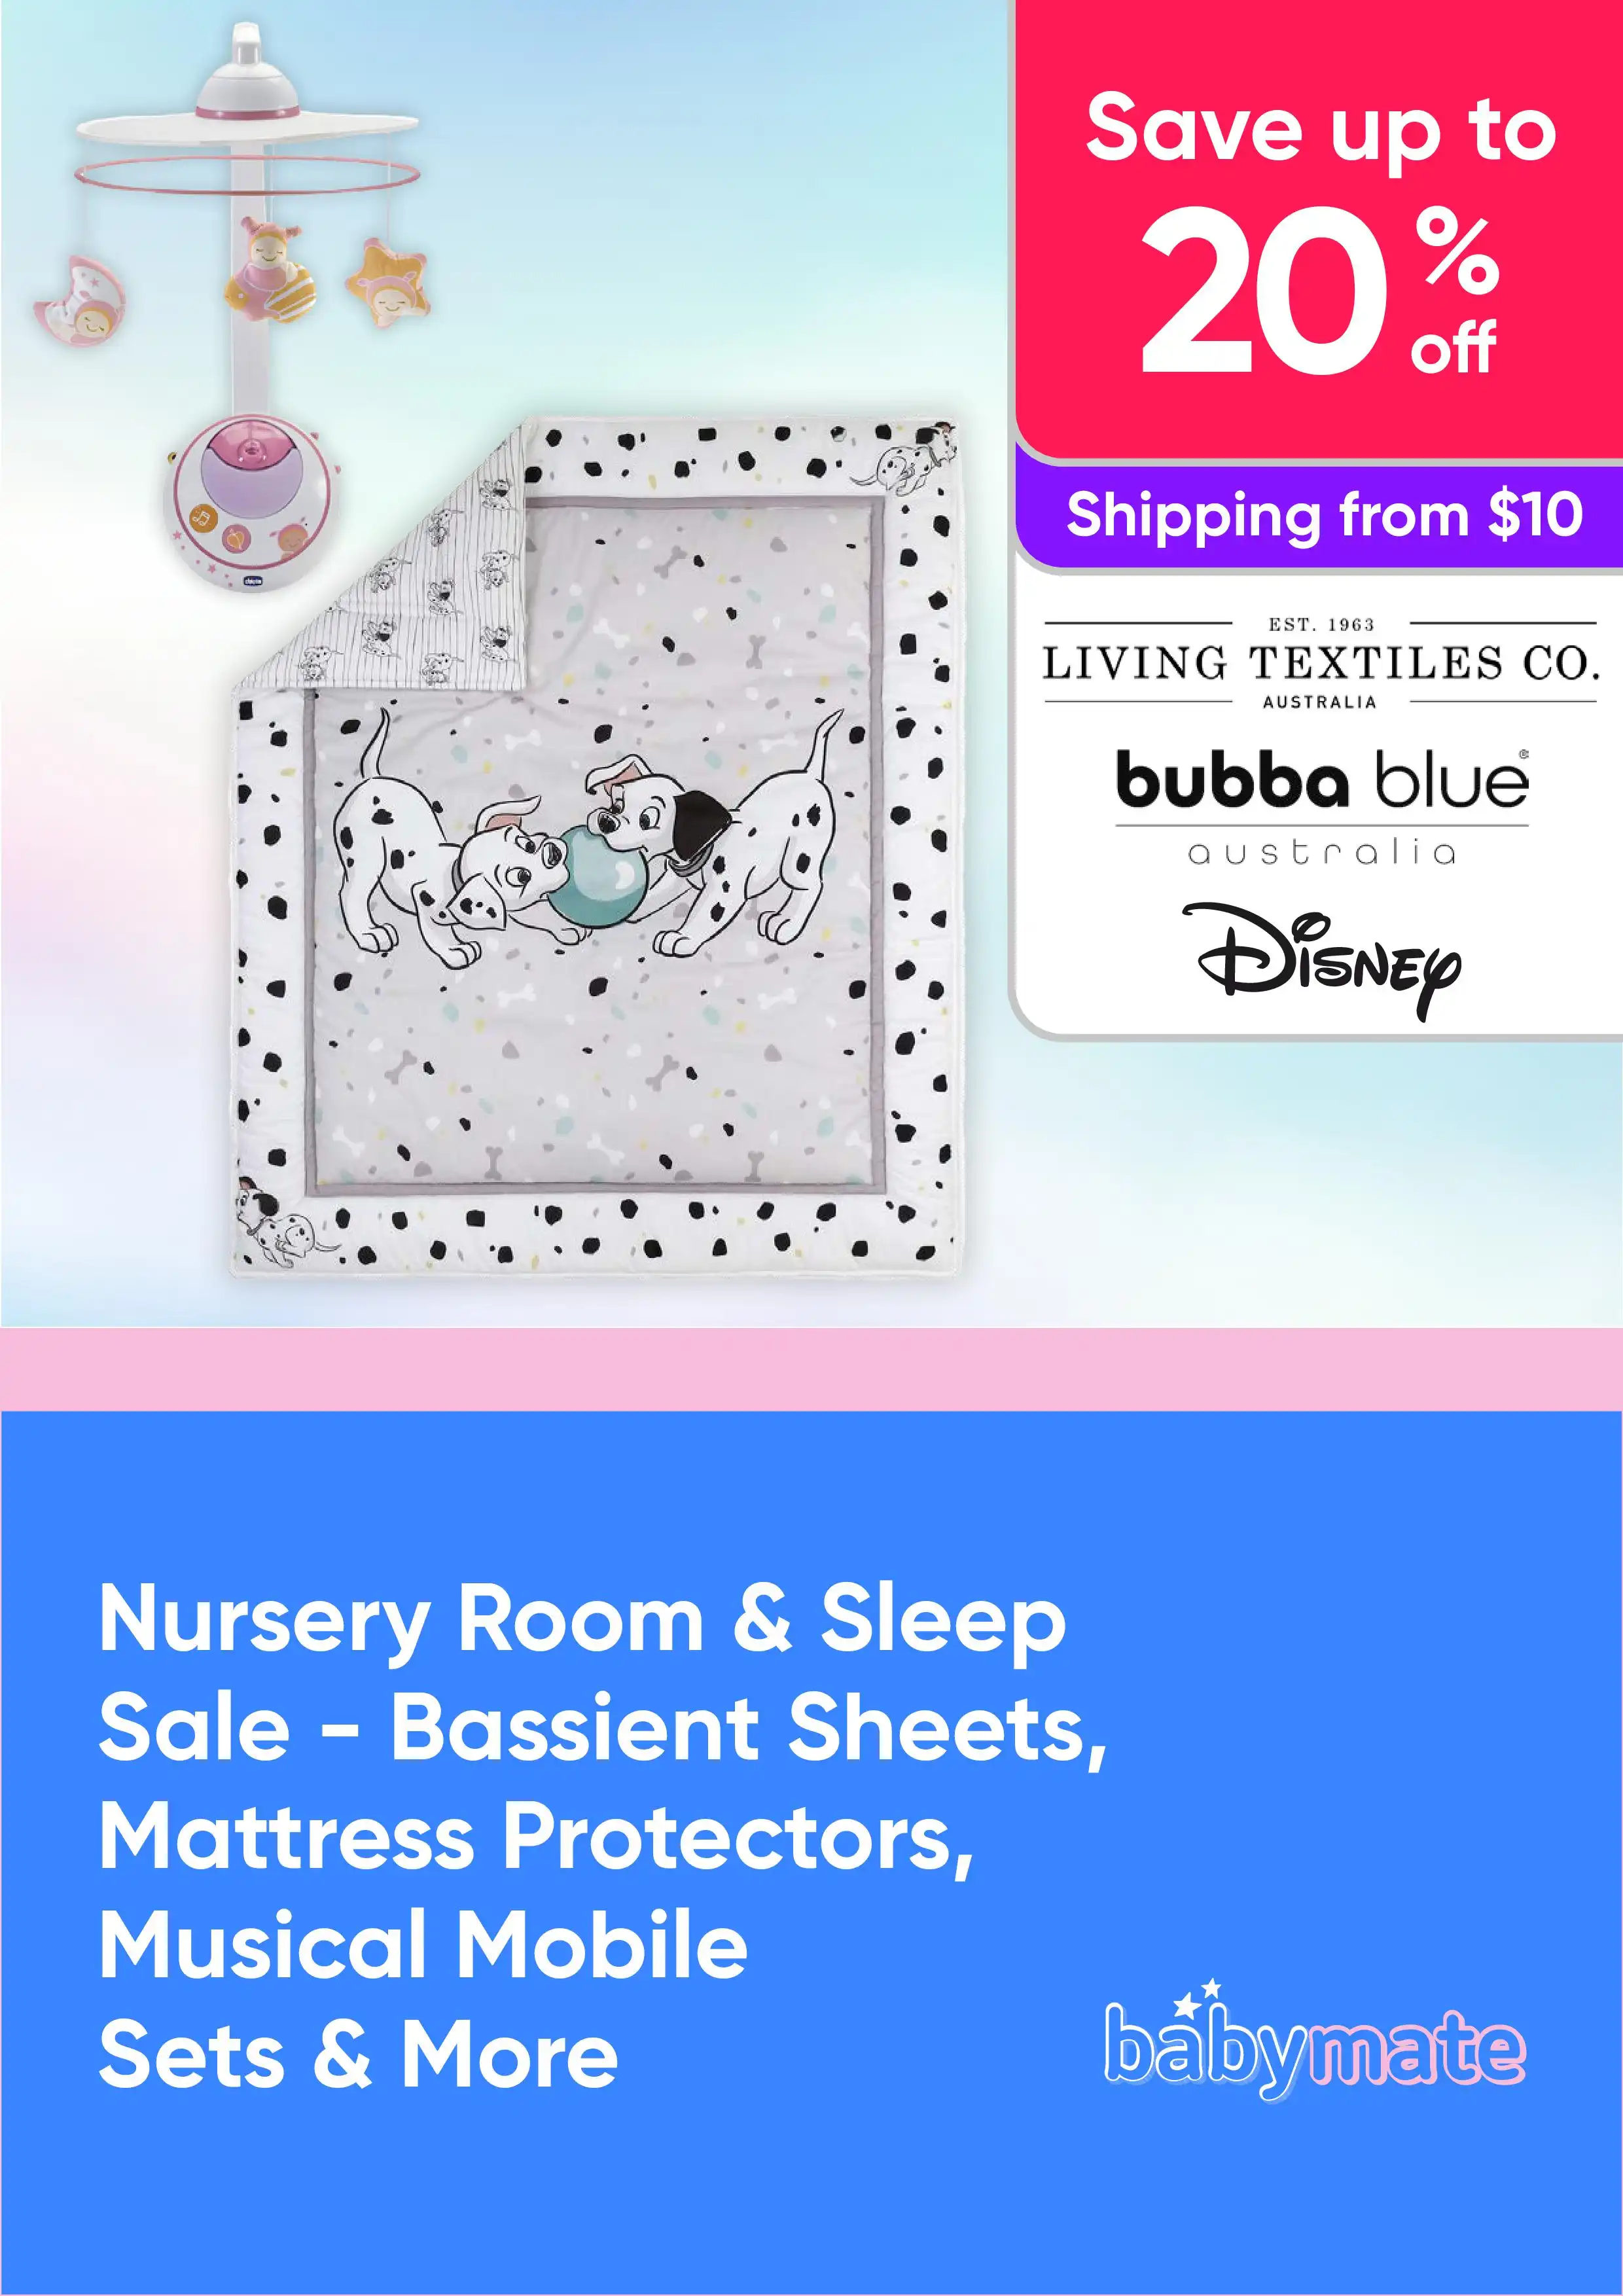 Nursery Room & Sleep Sale - Save On Bassient Sheets, Mattress Protectors and More